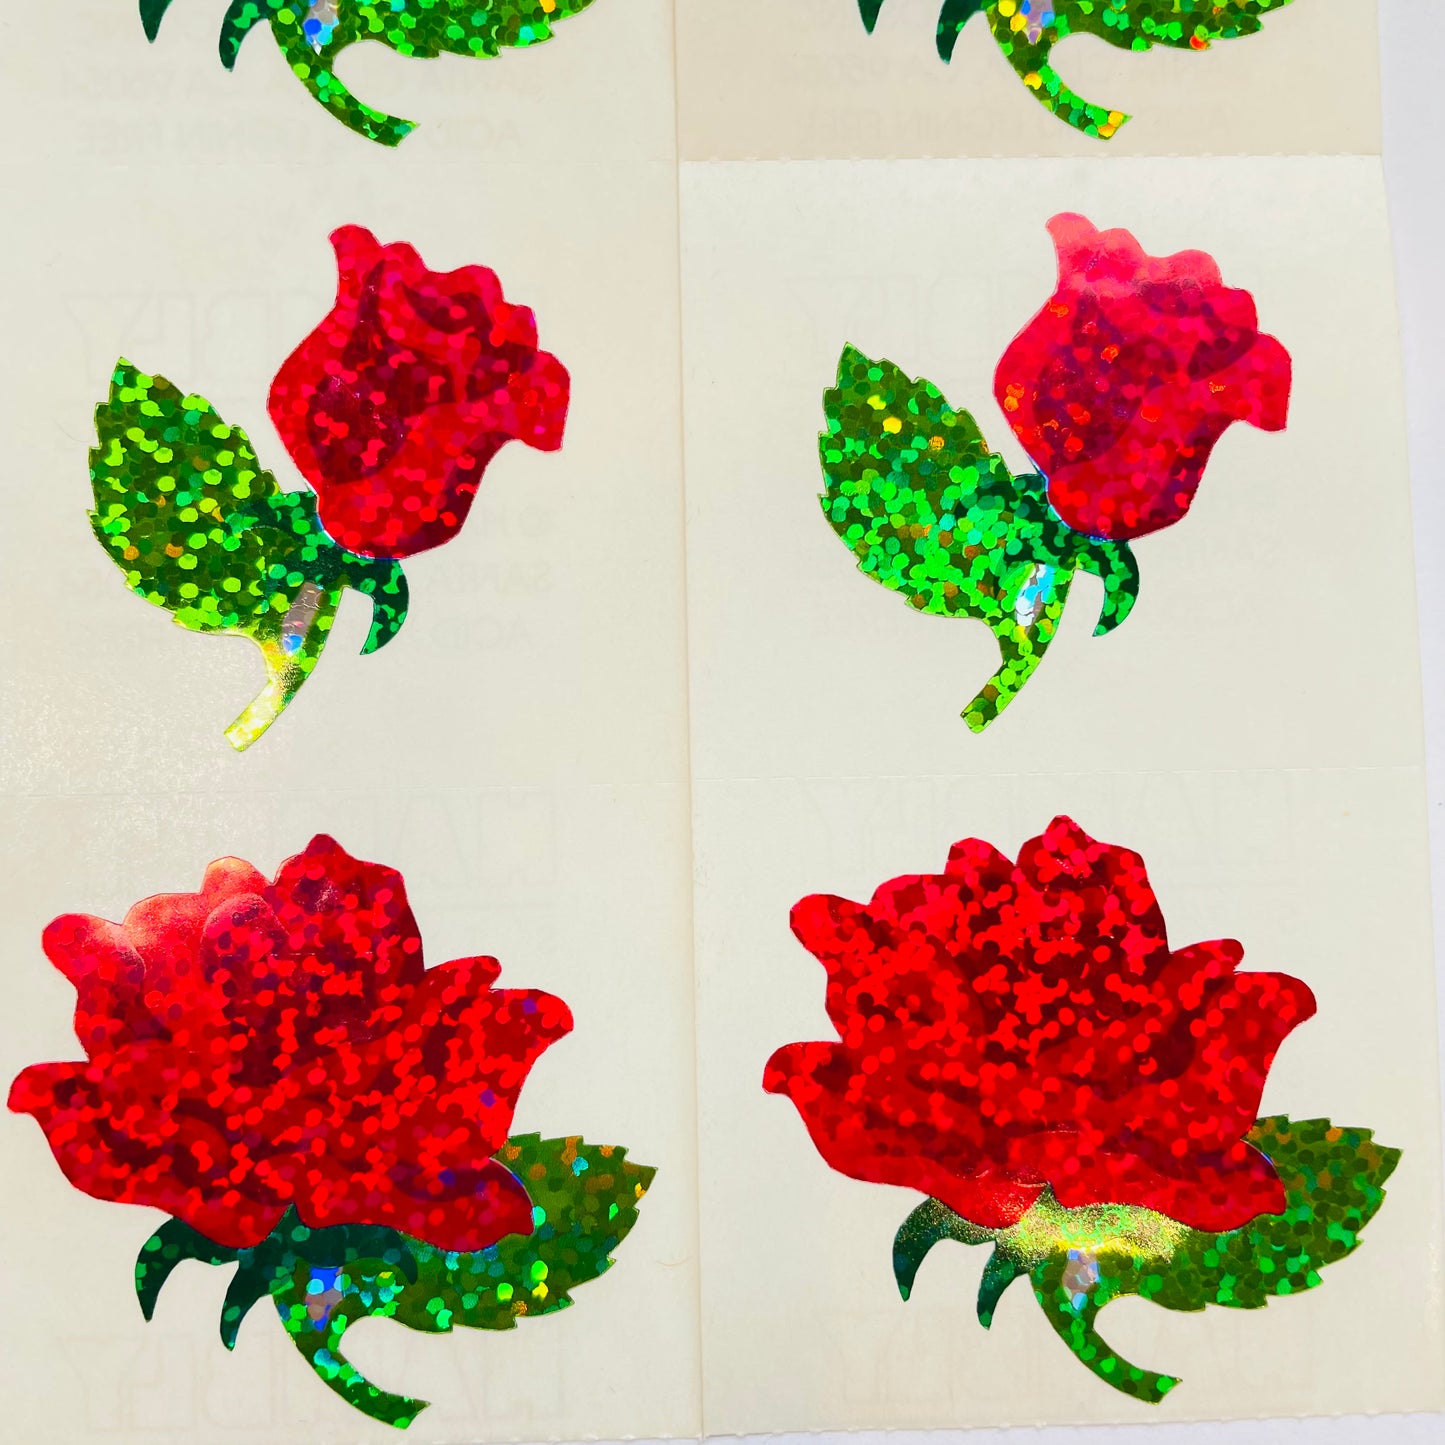 HAMBLY: Red Rose glitter stickers